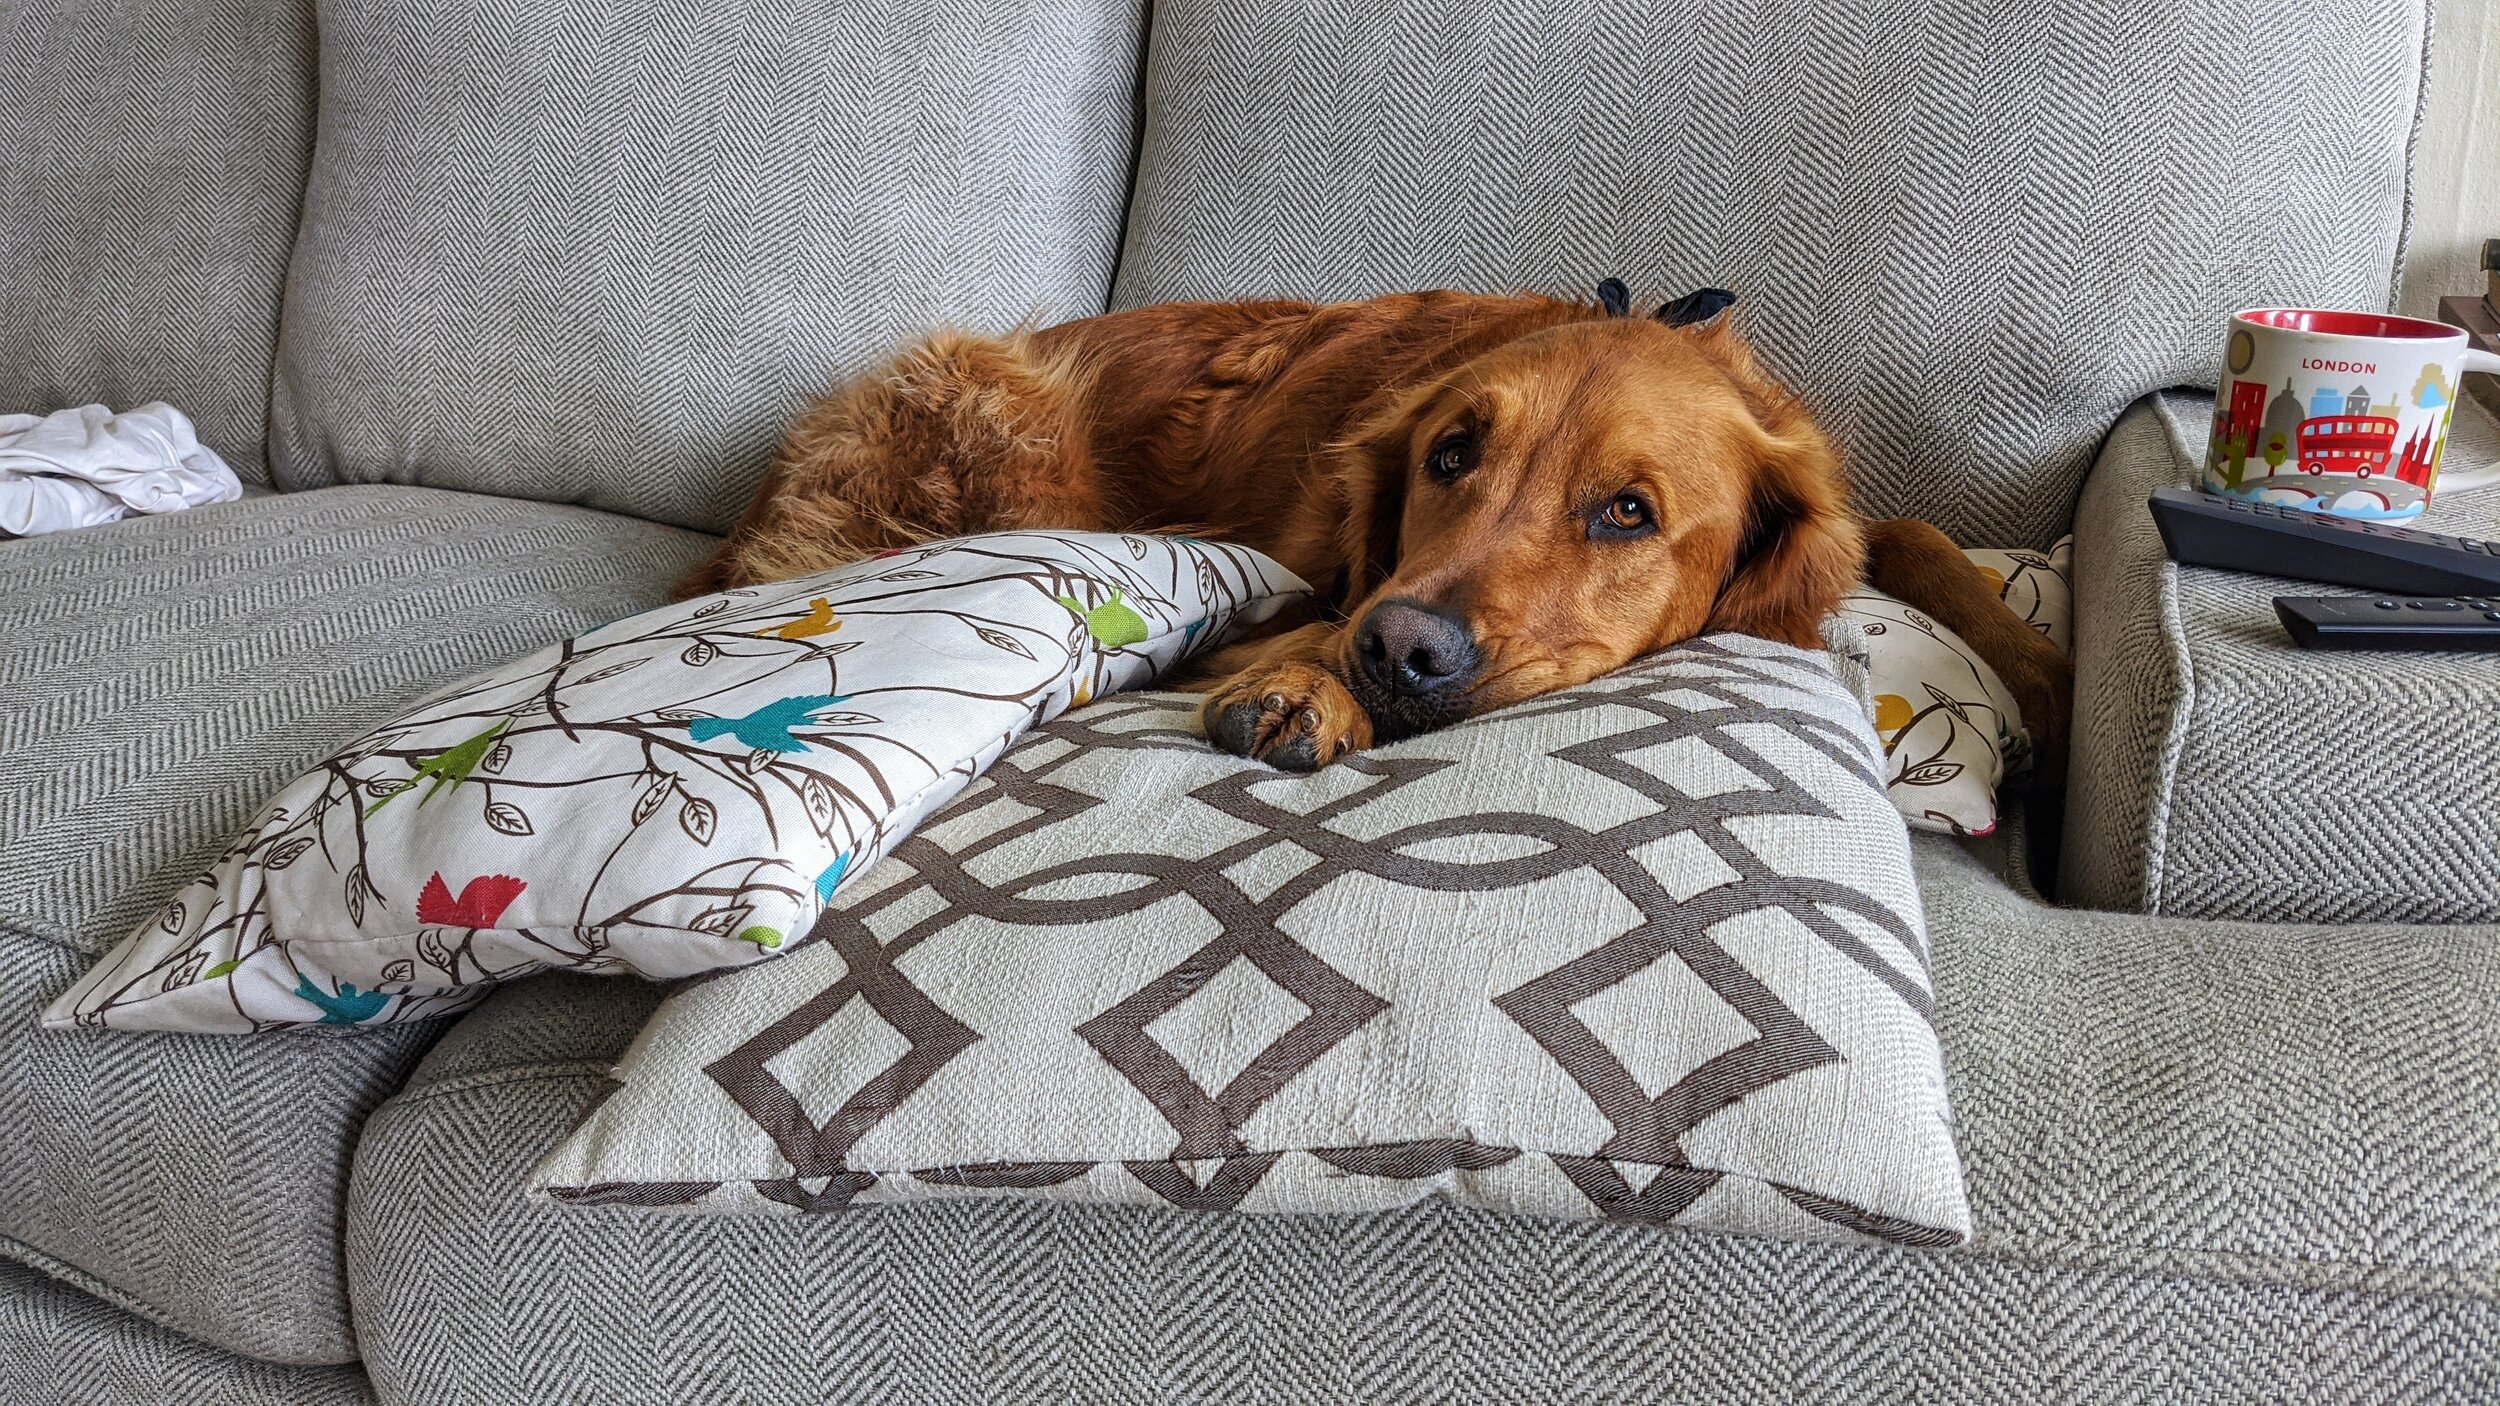 A golden retriever sits on the couch in a pile of pillows looking bored